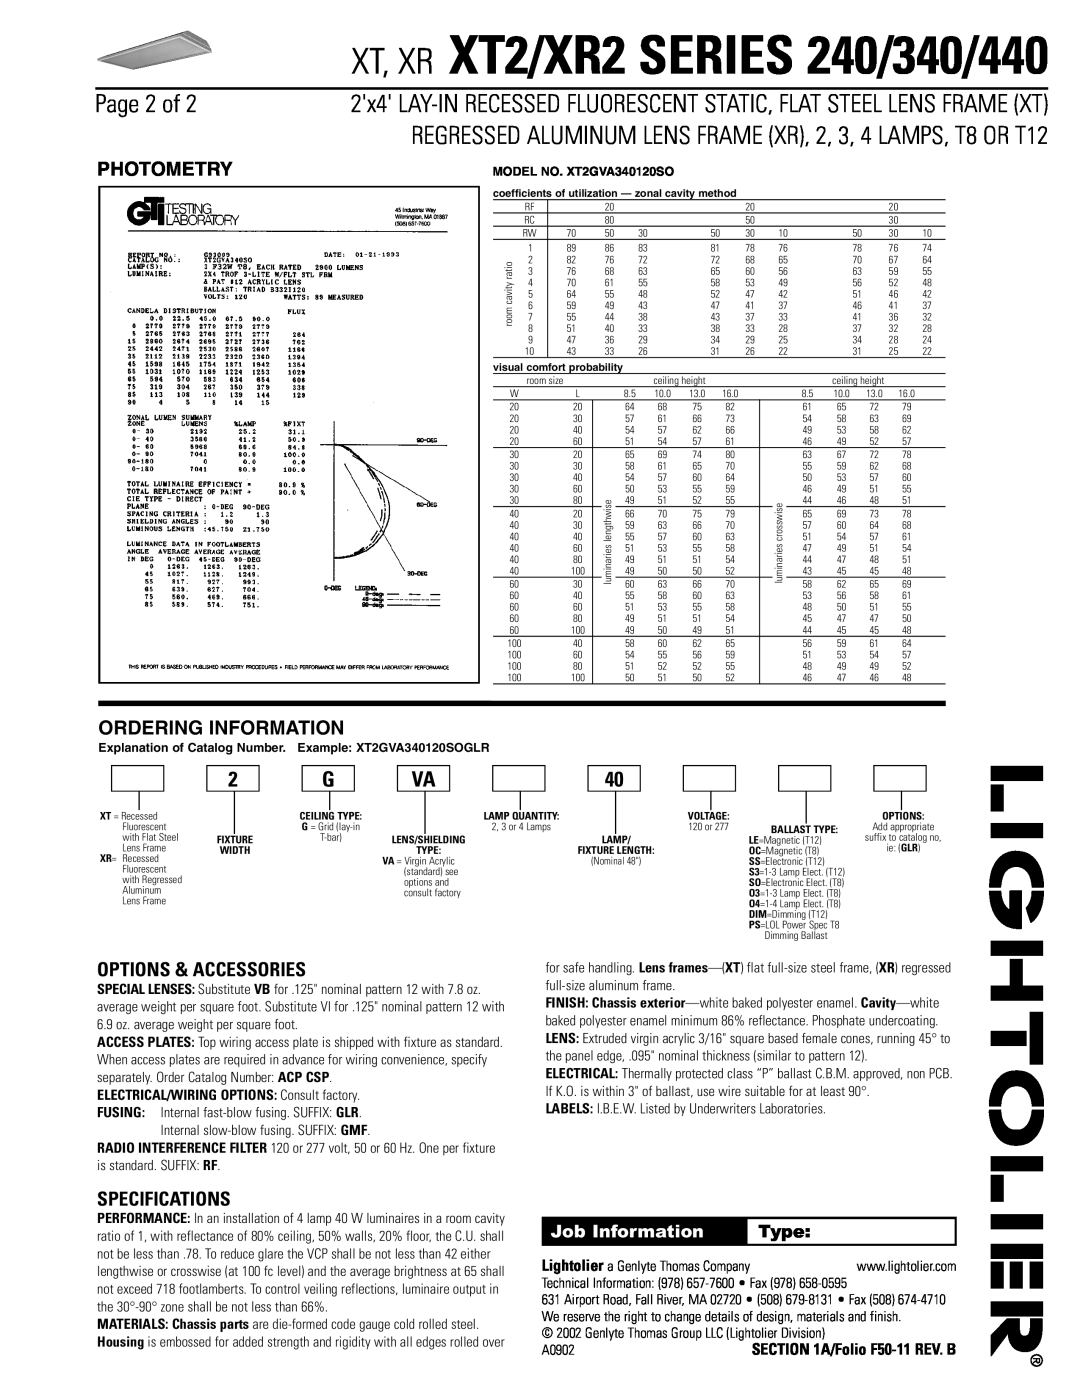 Lightolier Page 2 of, Options & Accessories, Specifications, XT, XR XT2/XR2 SERIES 240/340/440, Photometry, Type, Lamp 